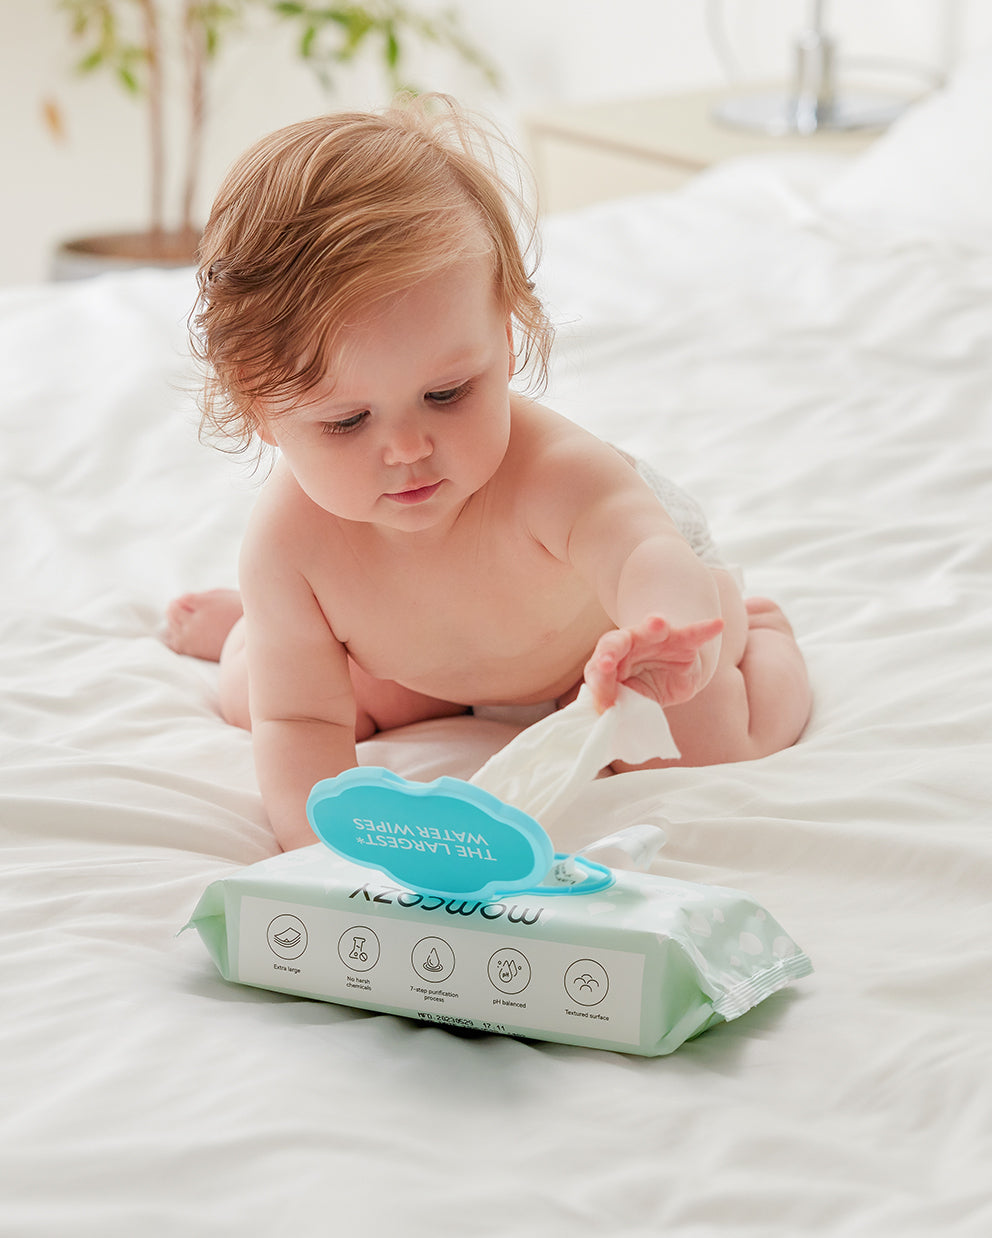 Baby Wipes by Momcozy, Babycozy Coconut Baby Wipes Cleansing